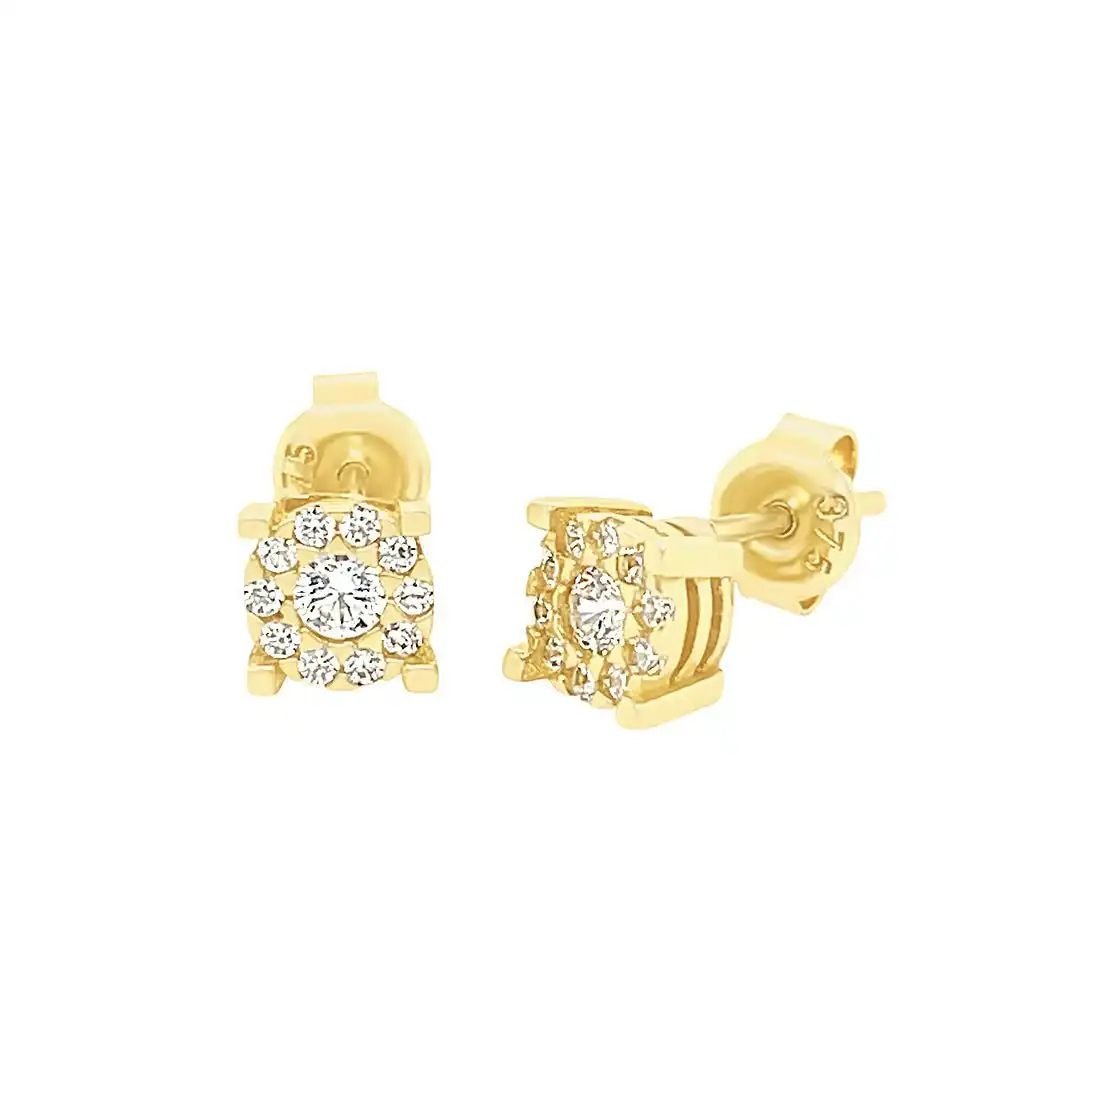 9ct Yellow Gold Stud Earrings with Cubic Zirconia